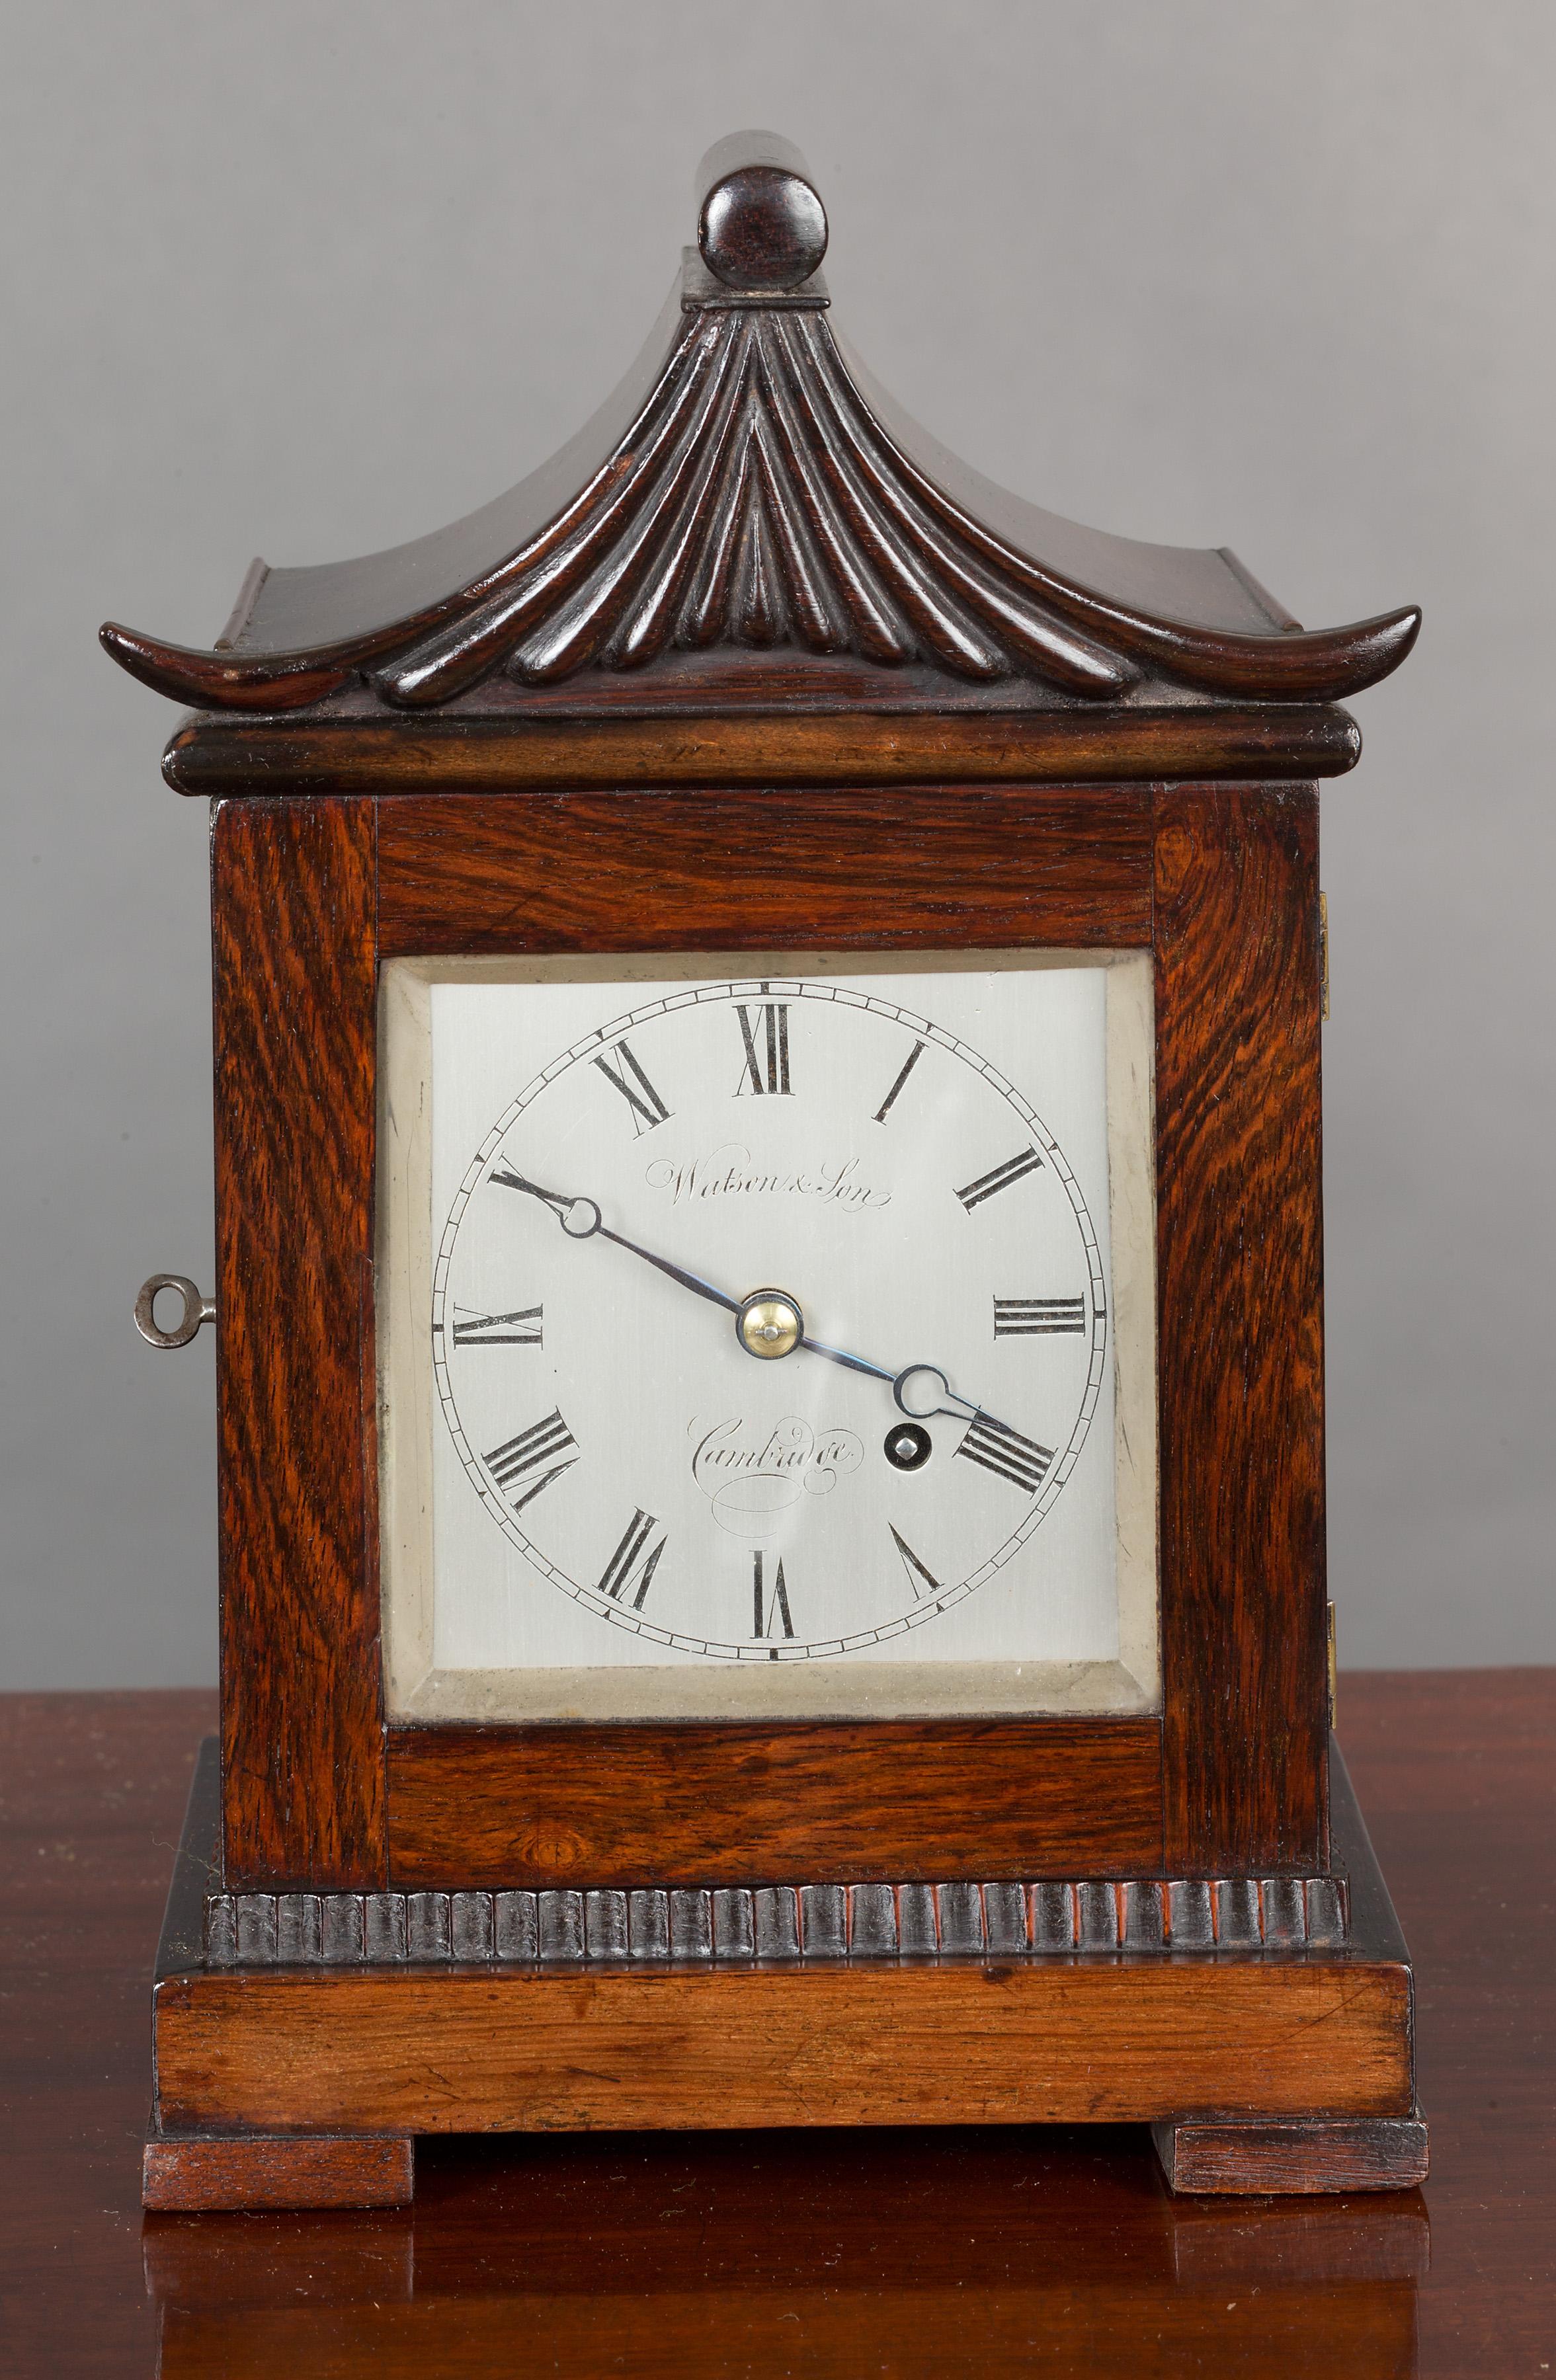 Georgian mahogany miniature bracket clock surmounted by a pagoda top with dentil moulding standing on four pad feet.

Silvered dial with Roman numerals and original ‘blued’ steel hands signed Watson & Son, Cambridge.

Eight day Fusee movement